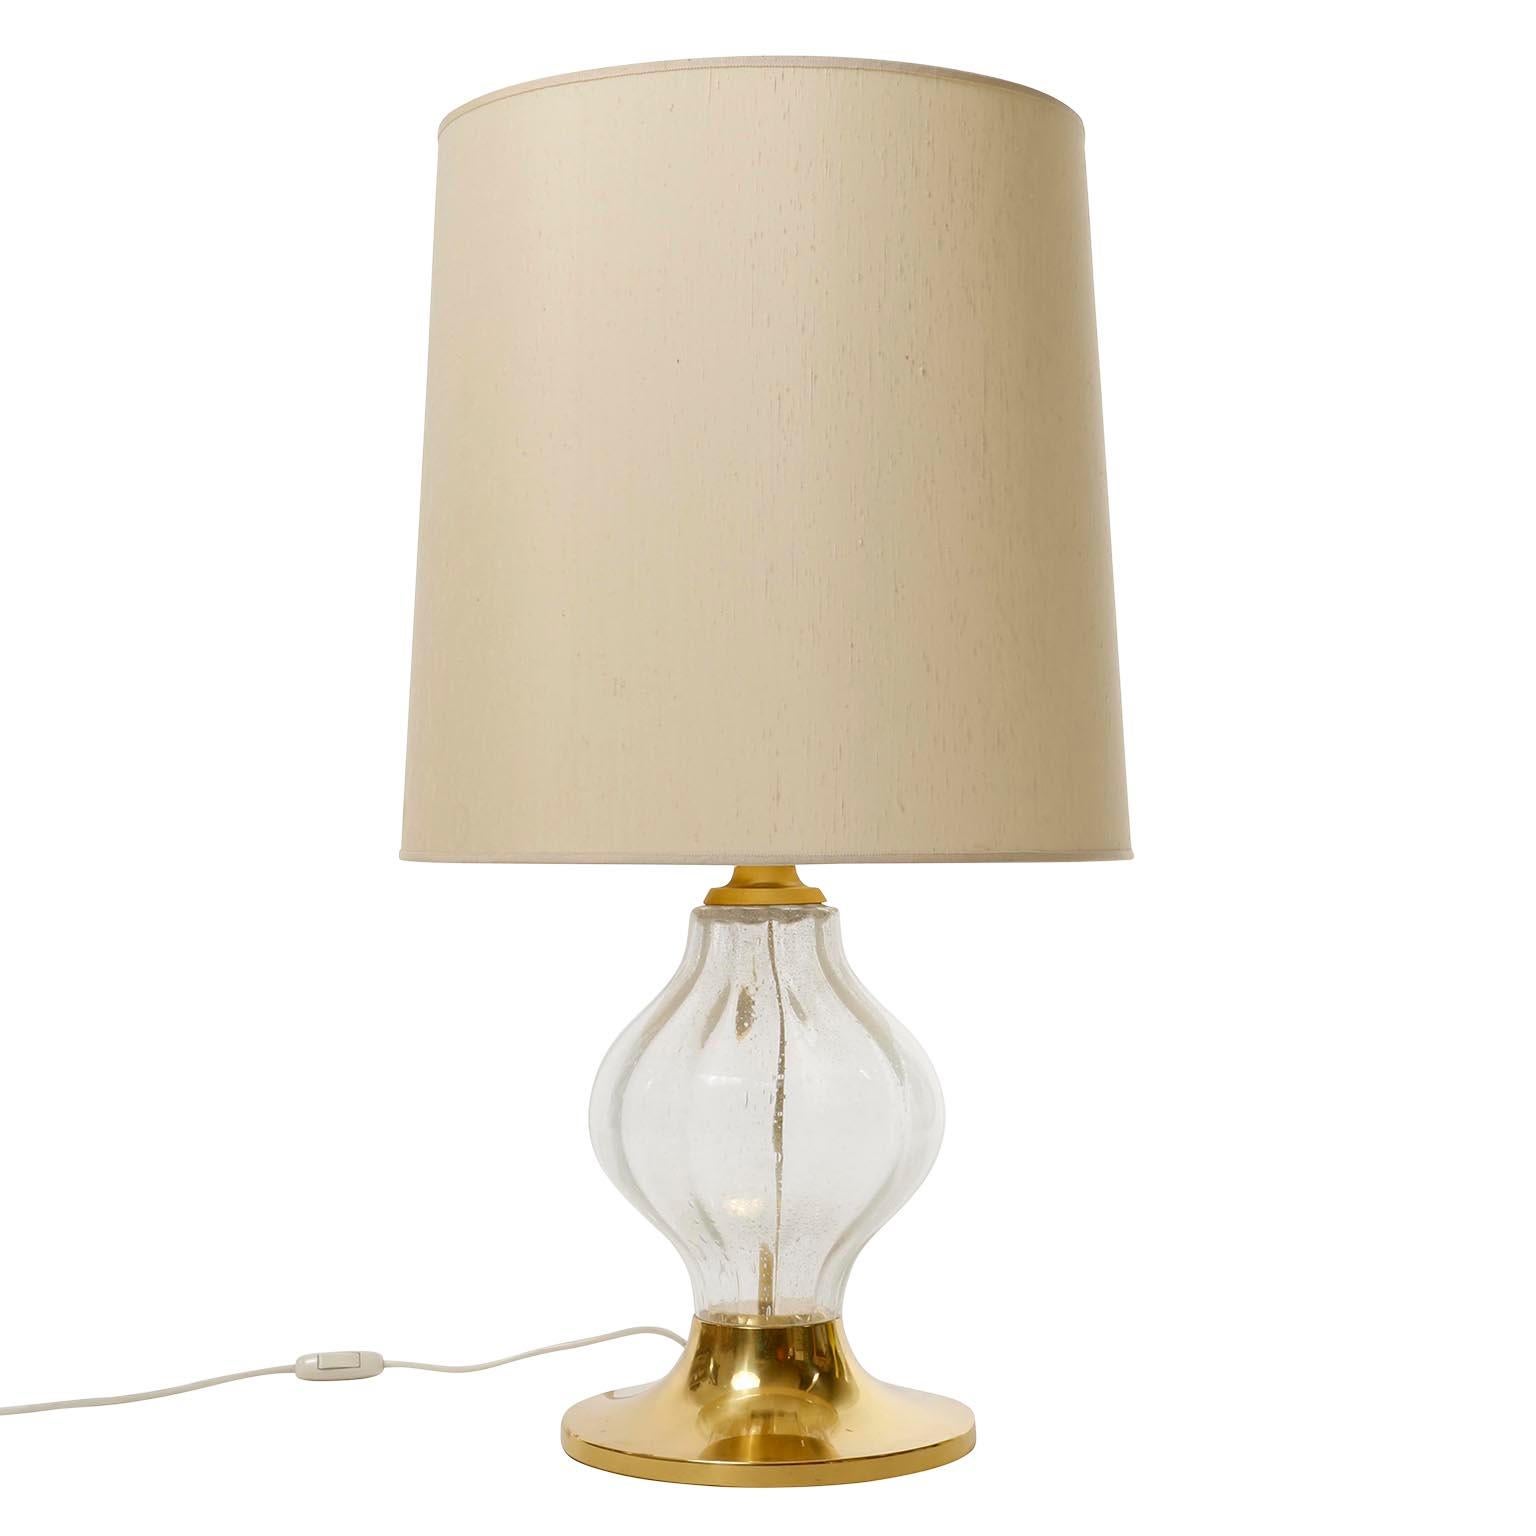 A pair of rare and large 'Tulipan' table lamps by Kalmar, Austria, manufactured in midcentury, circa 1970 (late 1960s or early 1970s).
A polished brass base with a large hand blown and tulip shaped seeded or bubbled glass body. Each light has one